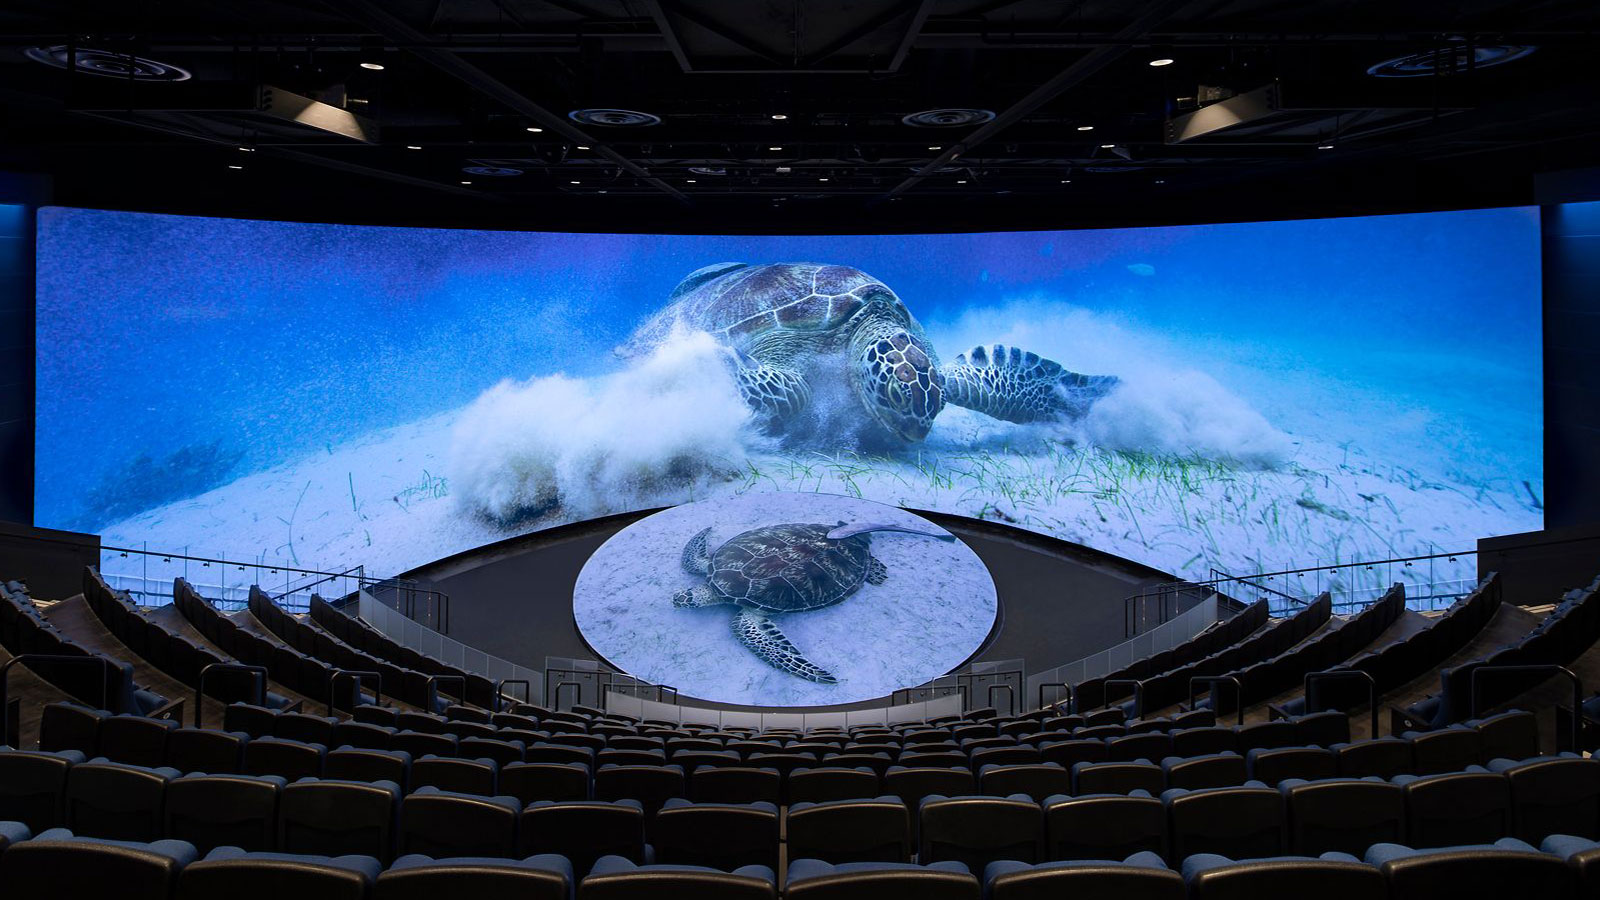 Honda Pacific Visions 4D theater at Aquarium of the Pacific with Ultraleap haptic technology